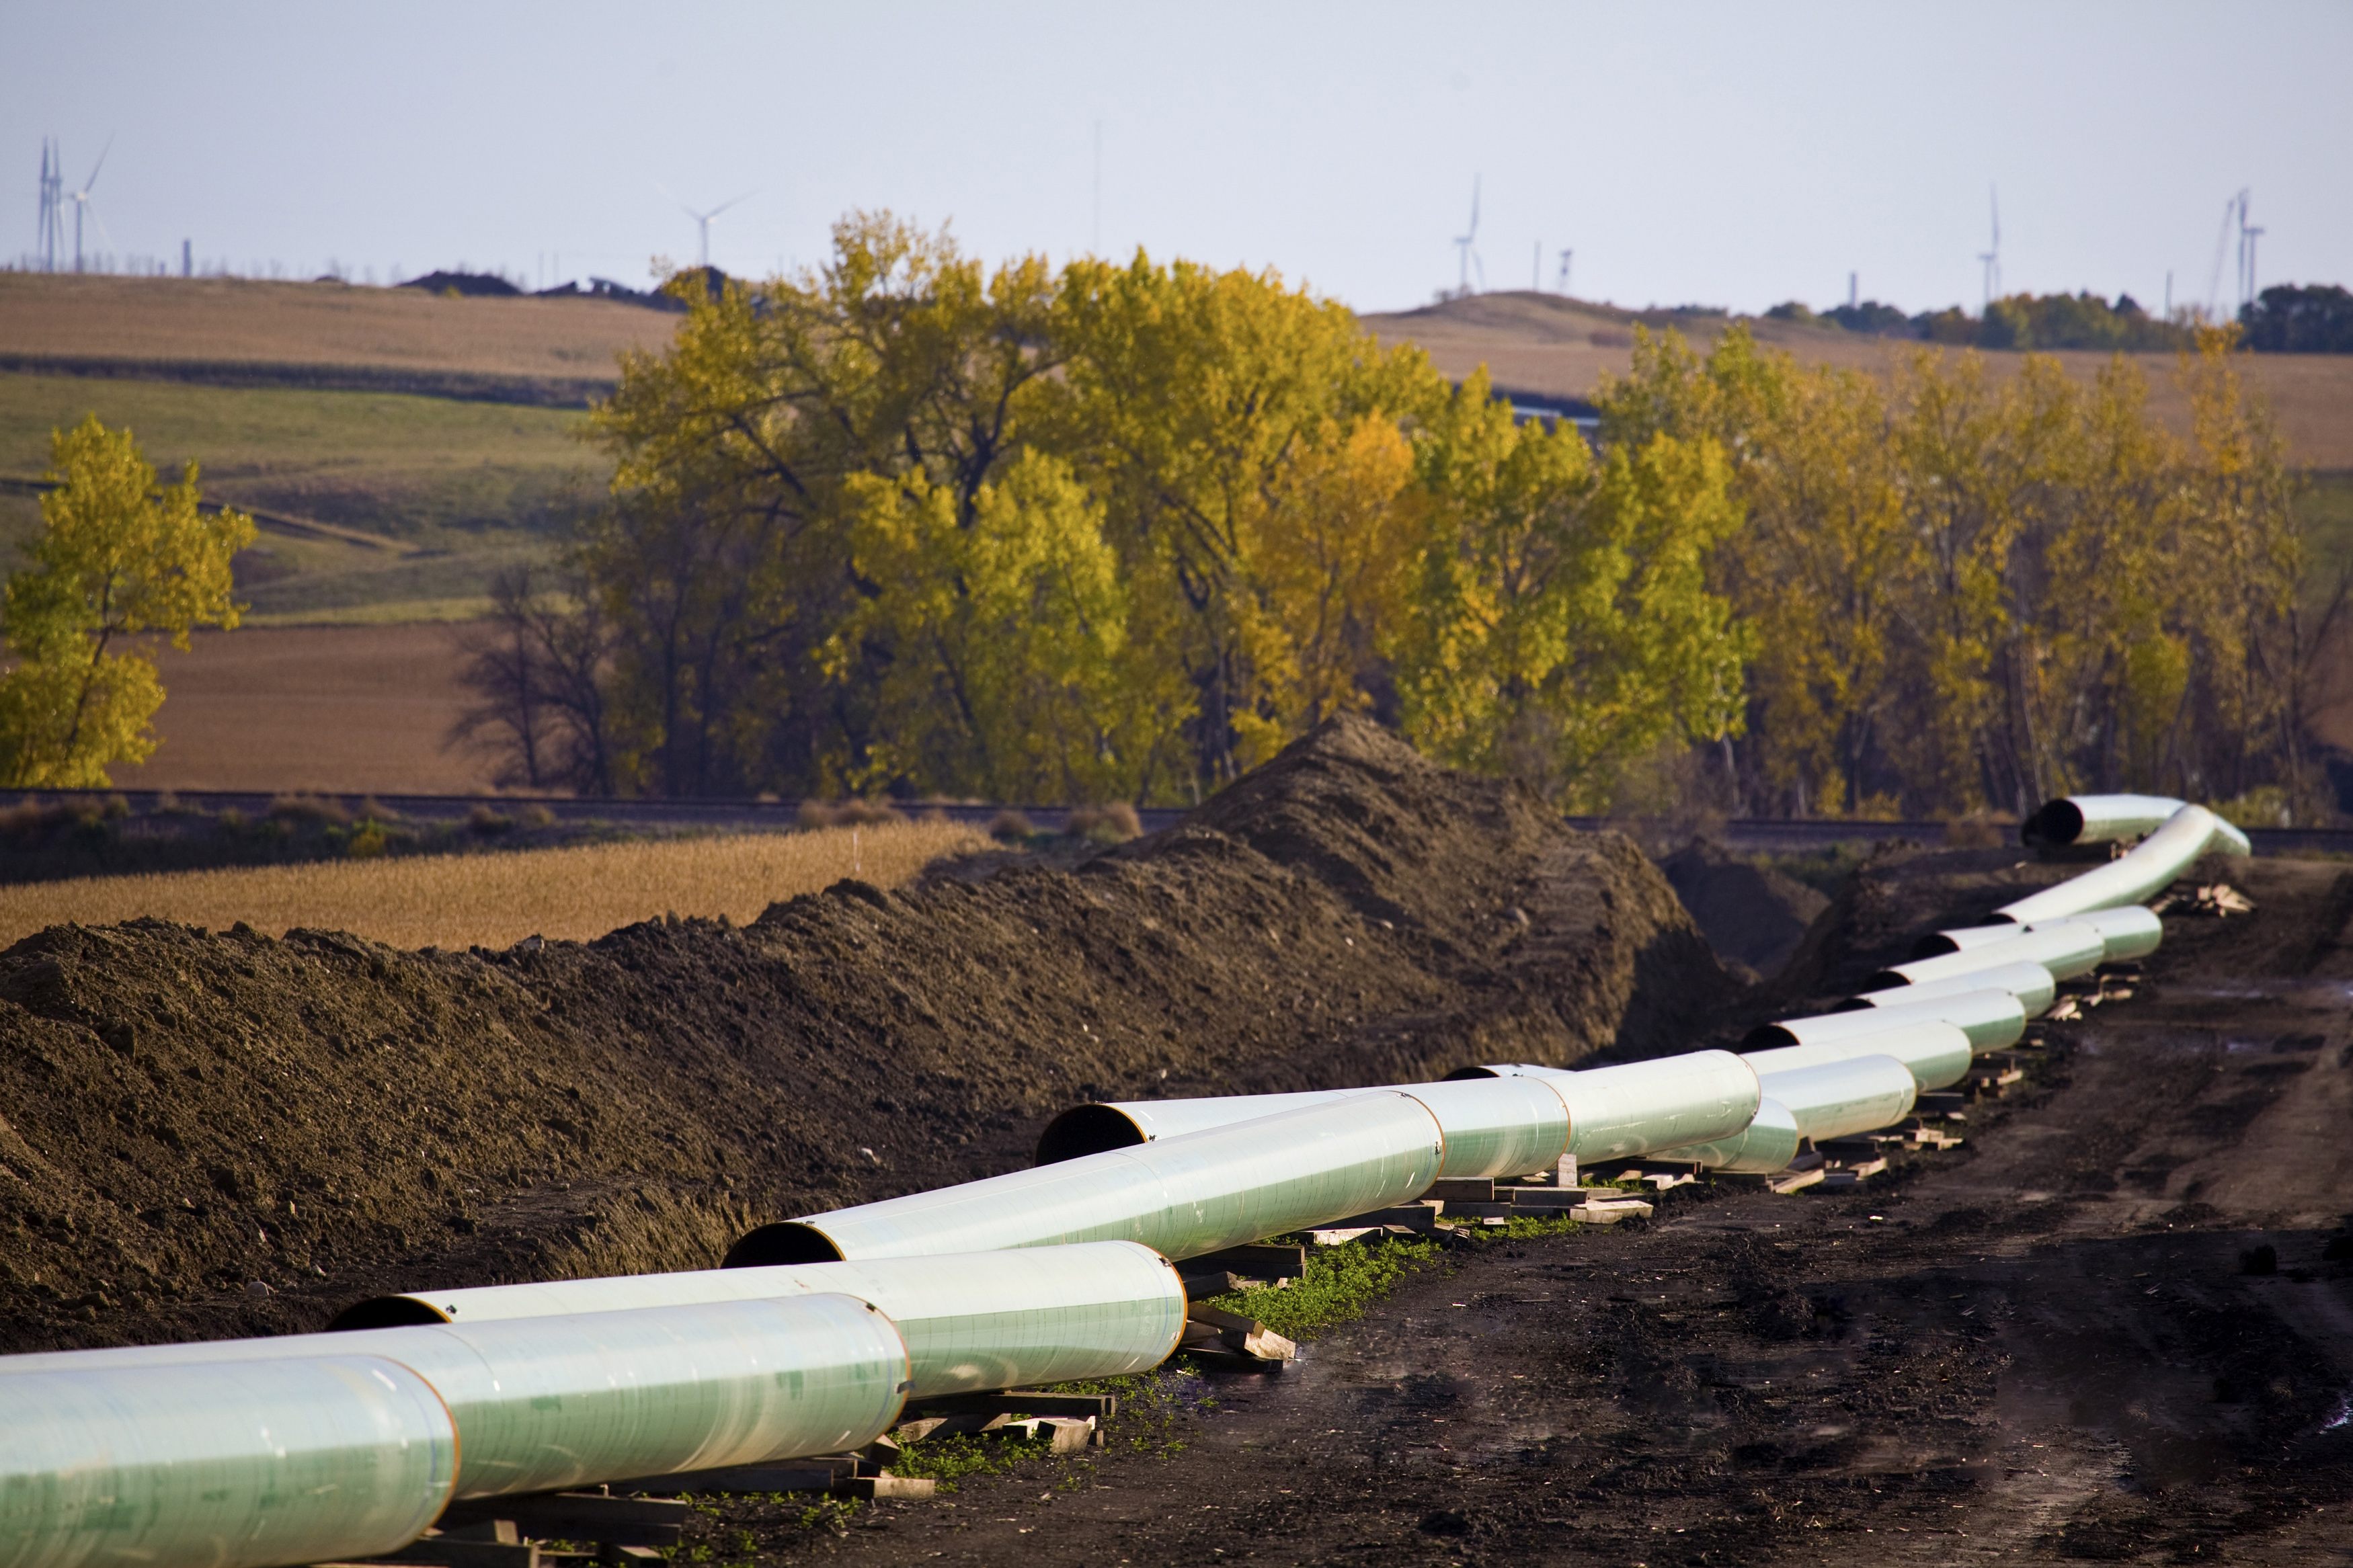 The Keystone Oil Pipeline under construction in North Dakota. The US State Department is considering the fate of the 800,000 bpd pipeline, which would carry crude from Canada’s oil sands to the Gulf Coast. Photo: Reuters